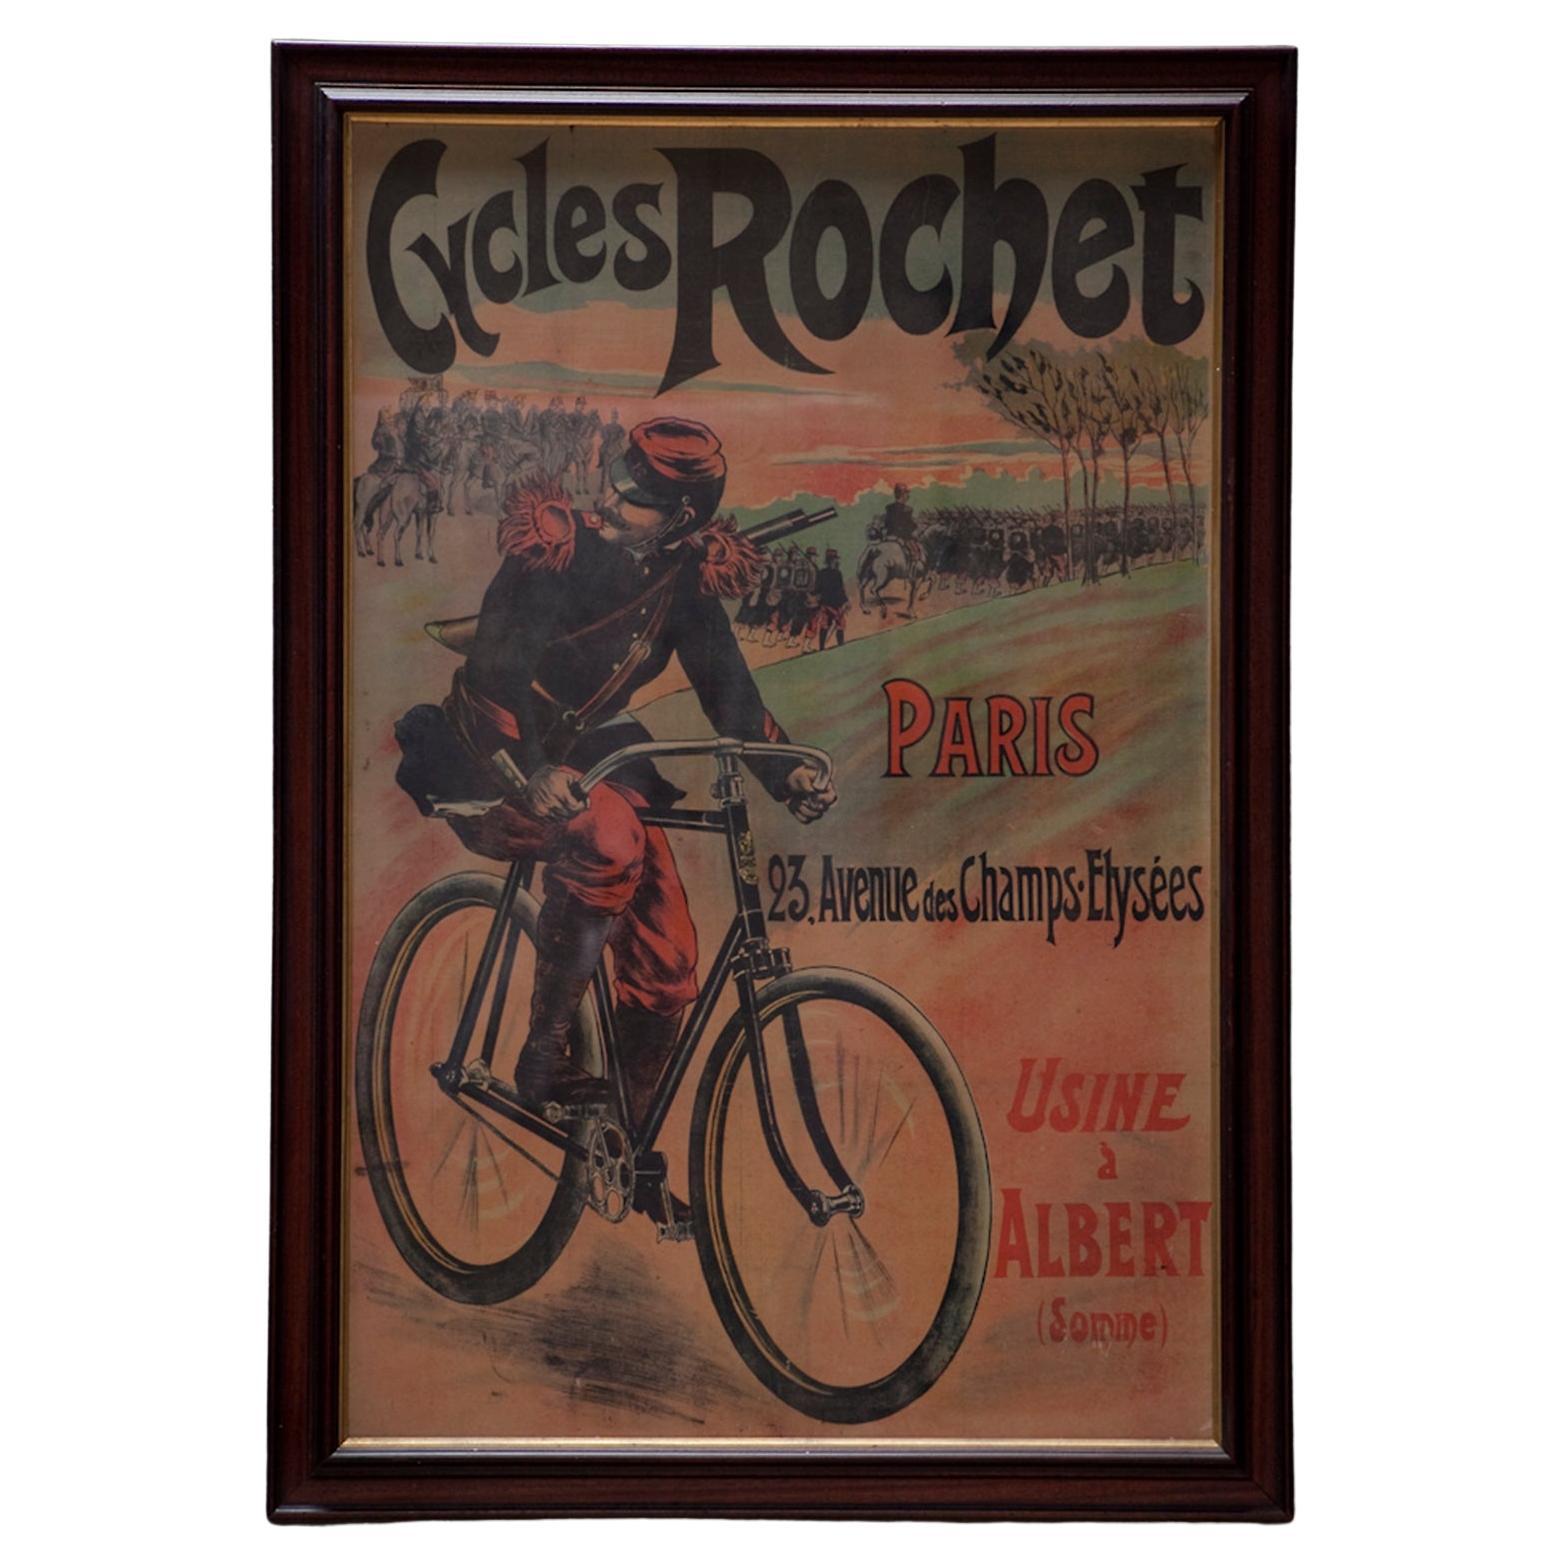 Framed Extra Large Linen Backed Poster for "Cycles Rochet" circa 1895 For Sale